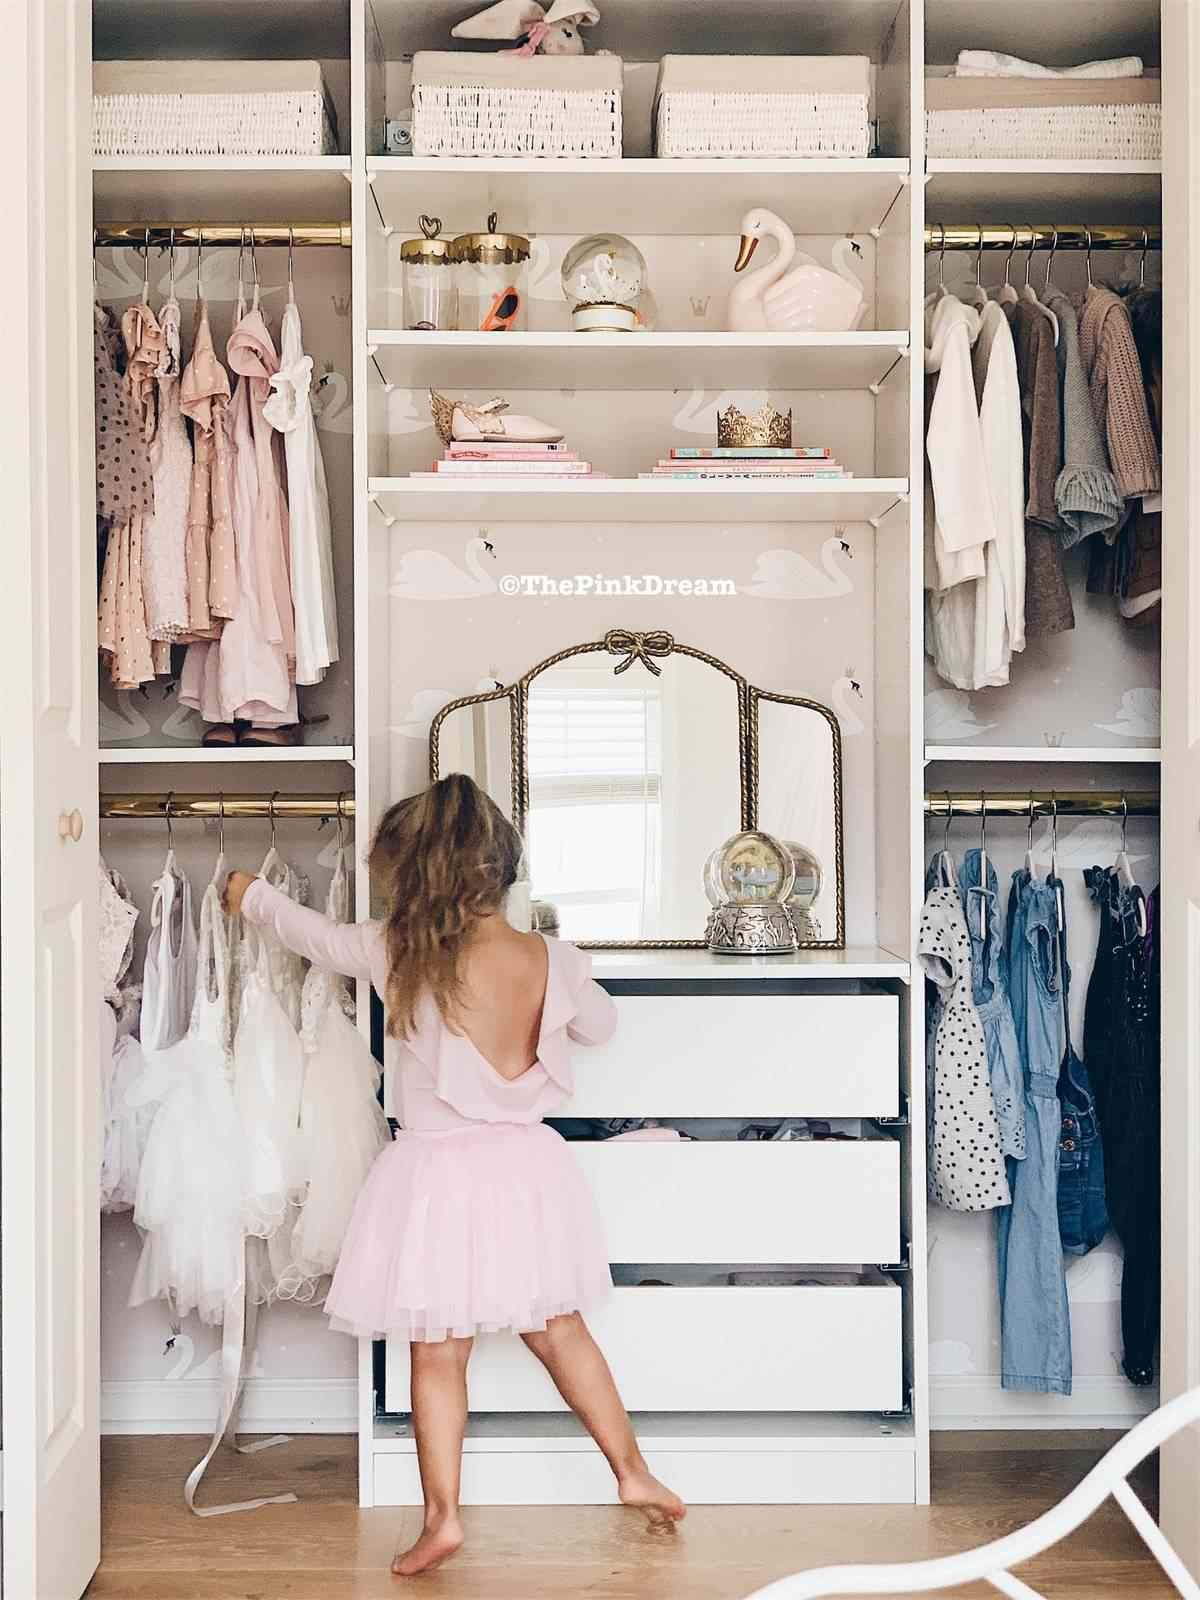 8 Tips For Designing Better Kids' Rooms With Regard To Double Rail Childrens Wardrobes (View 8 of 15)